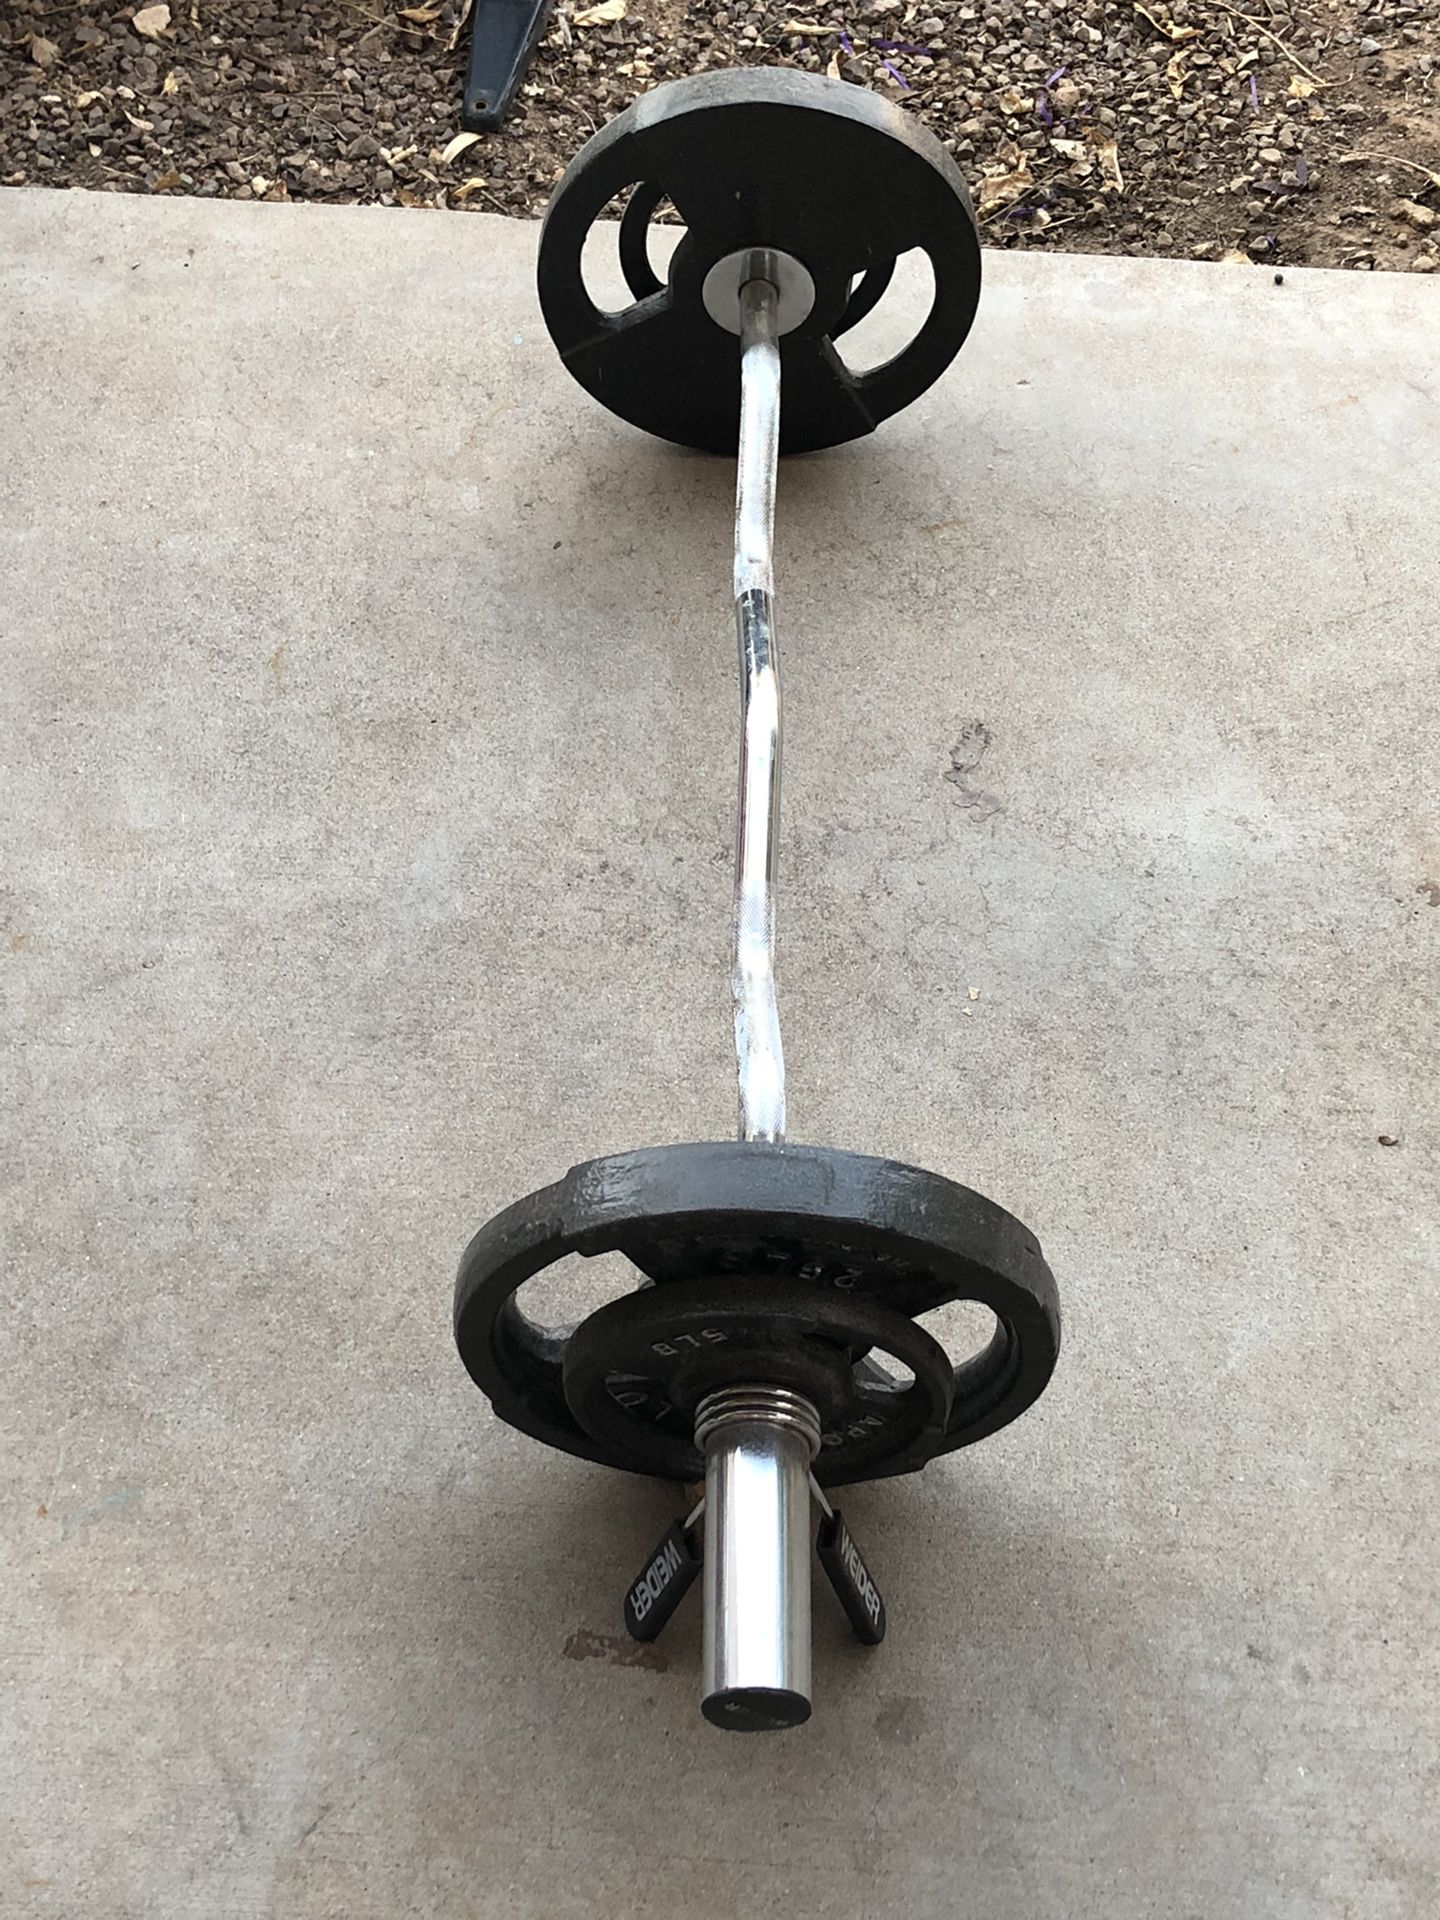 Apollo weights and Weider curling bar